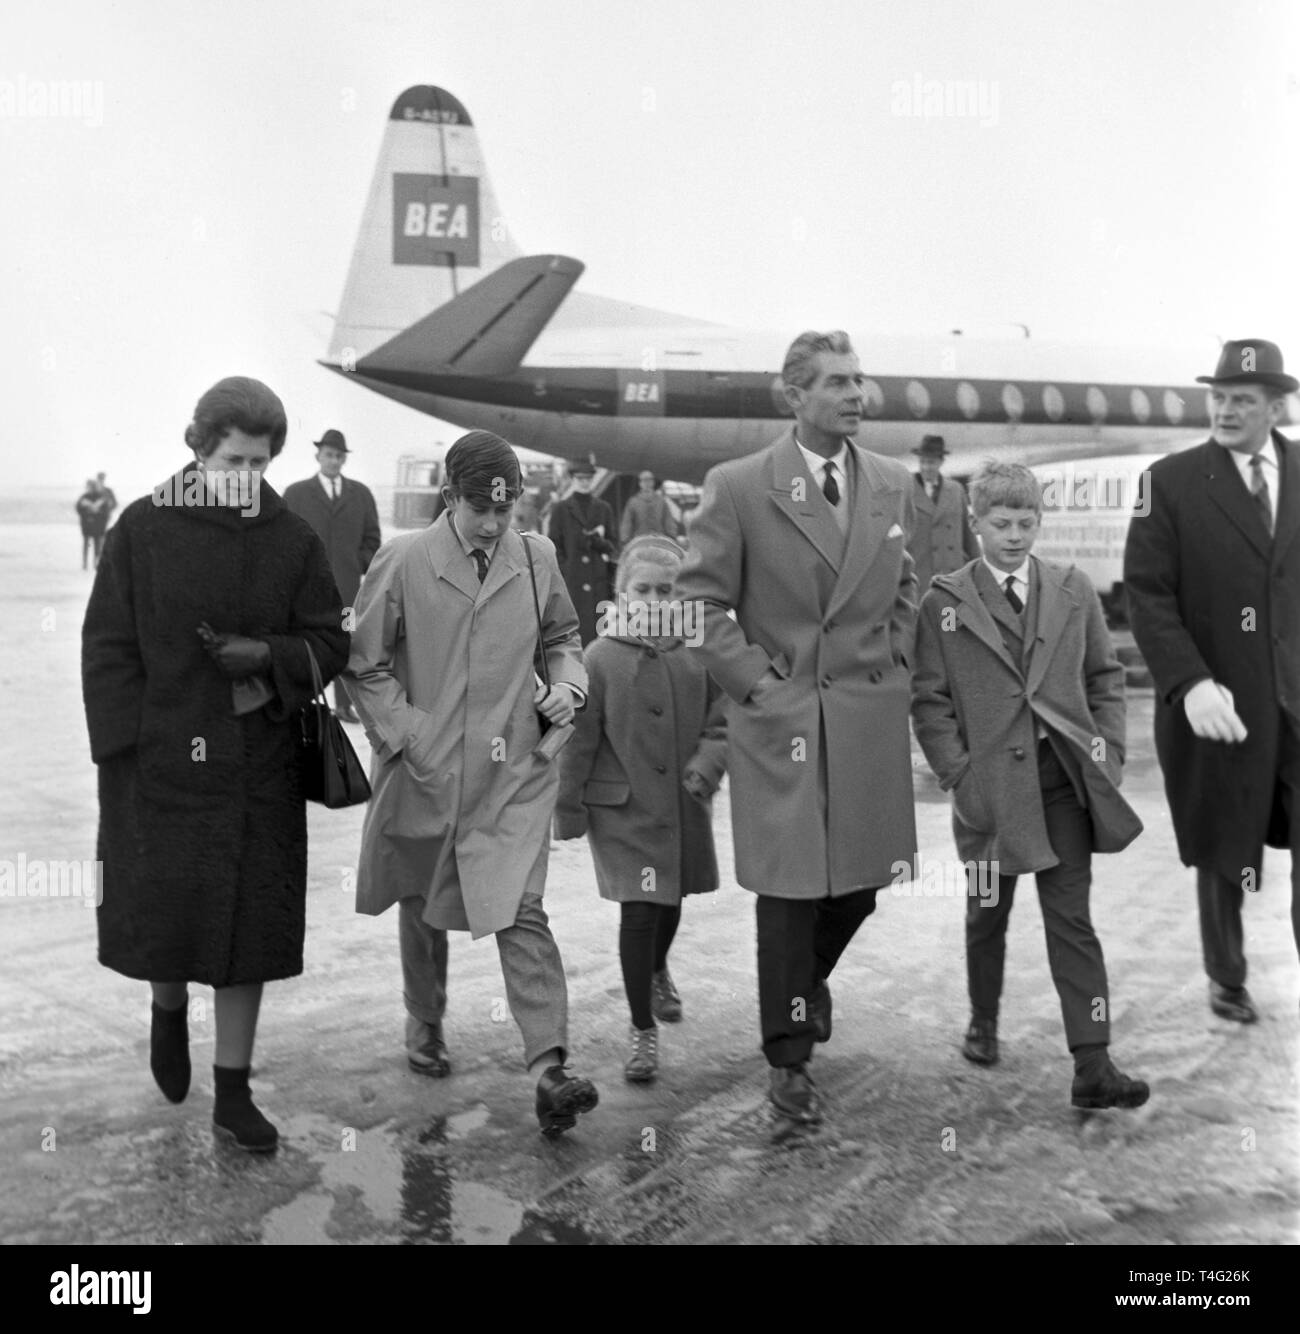 Prince Charles, Queen Elizabeth II.'s son, arrives for his first visit to  Germany at the airport of Munich on the 9th of January in 1963. He will  travel on to Switzerland afterwards.